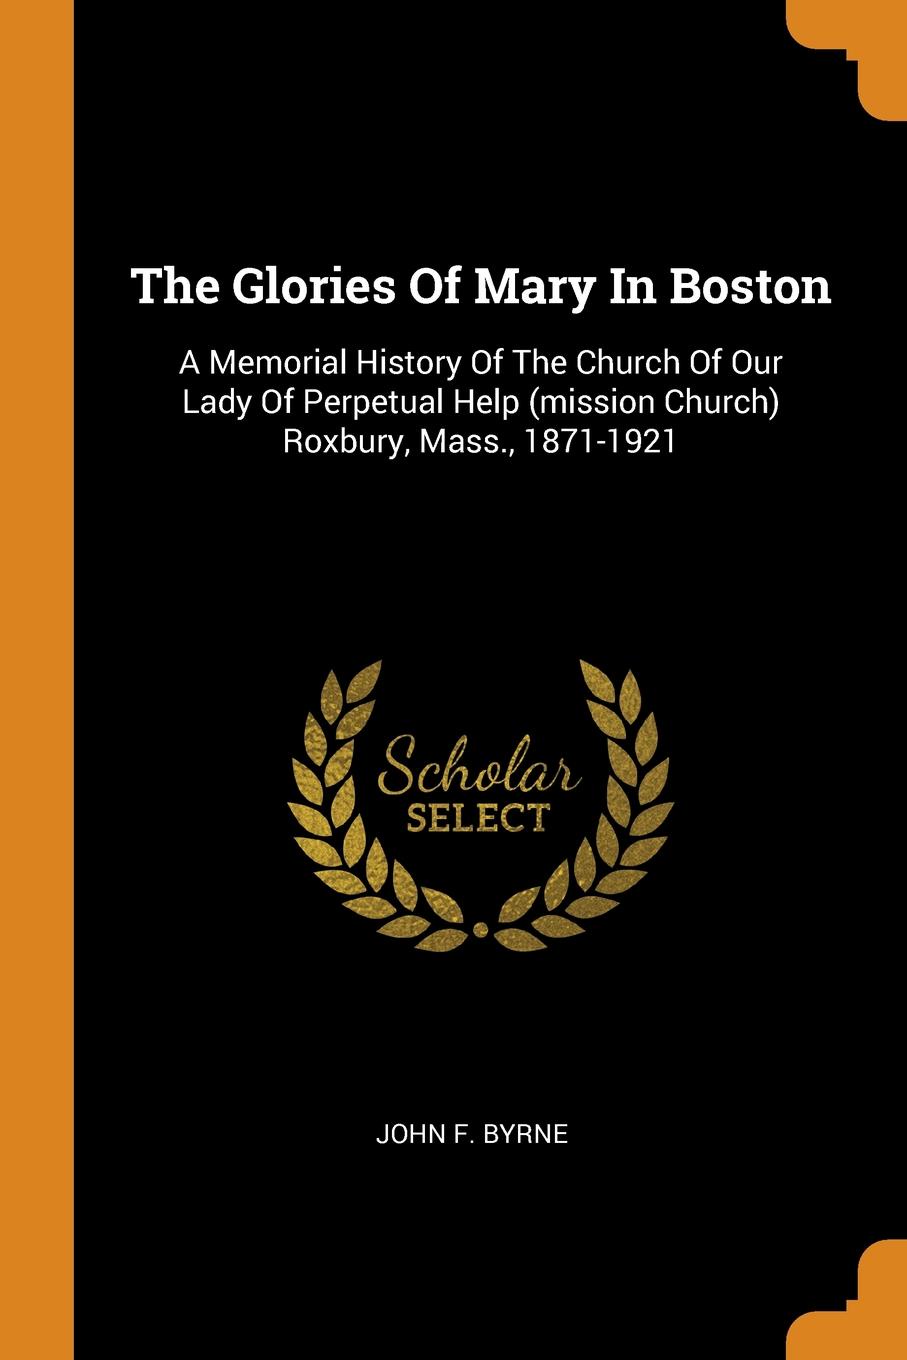 The Glories Of Mary In Boston. A Memorial History Of The Church Of Our Lady Of Perpetual Help (mission Church) Roxbury, Mass., 1871-1921